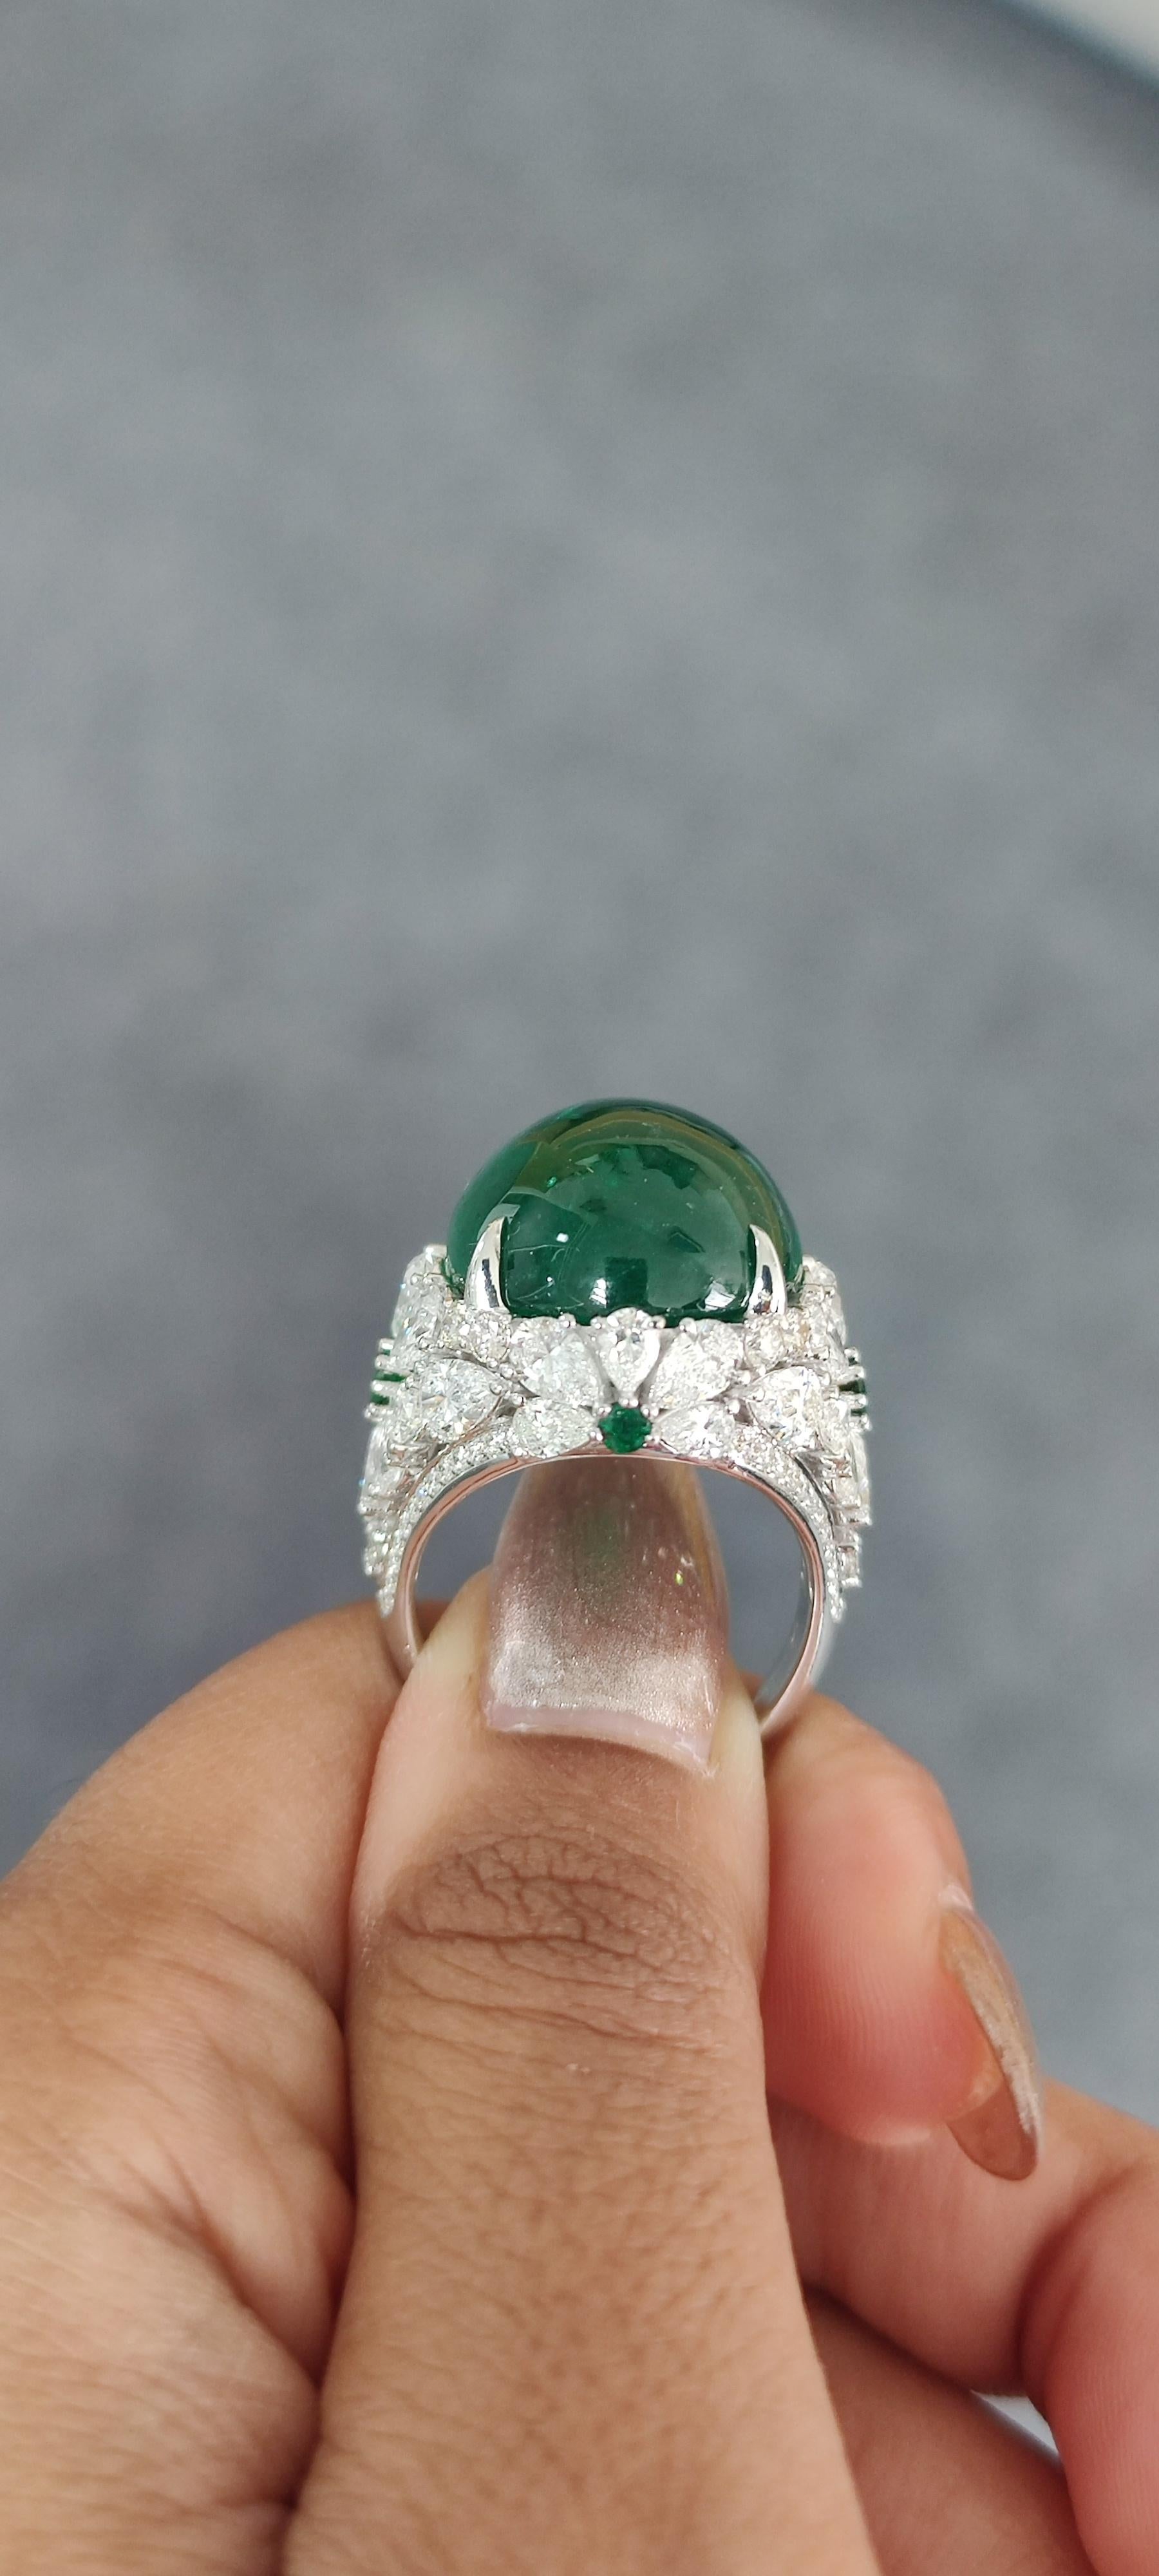 24.60 Carat Cabochon Emerald Art Deco Inspired One-of-a-kind Statement Ring For Sale 6